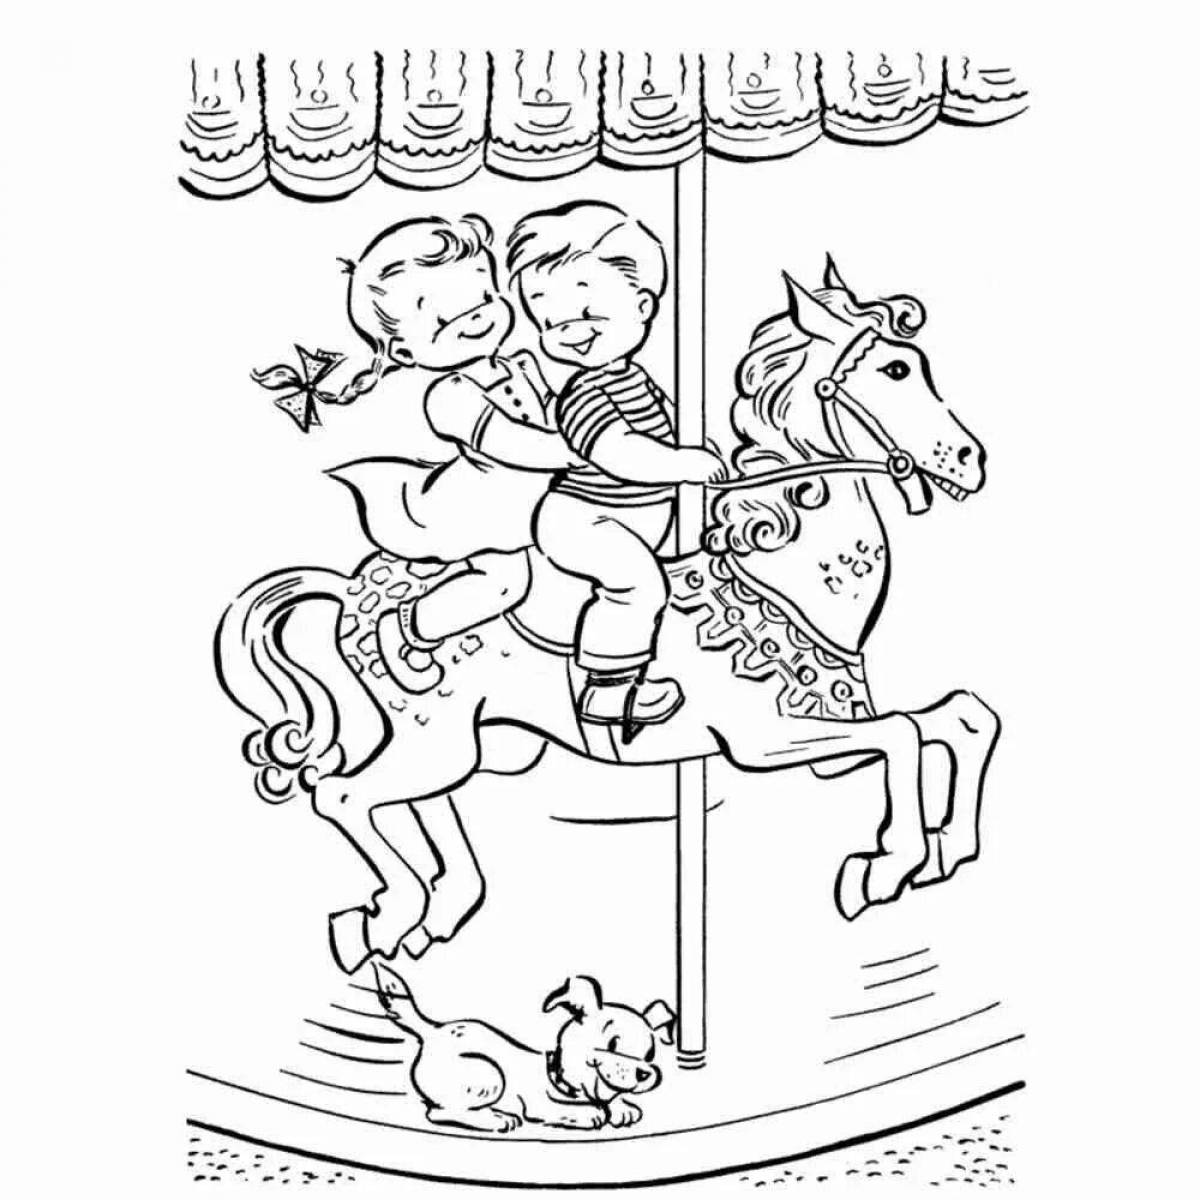 Colorific carousel coloring book for kids